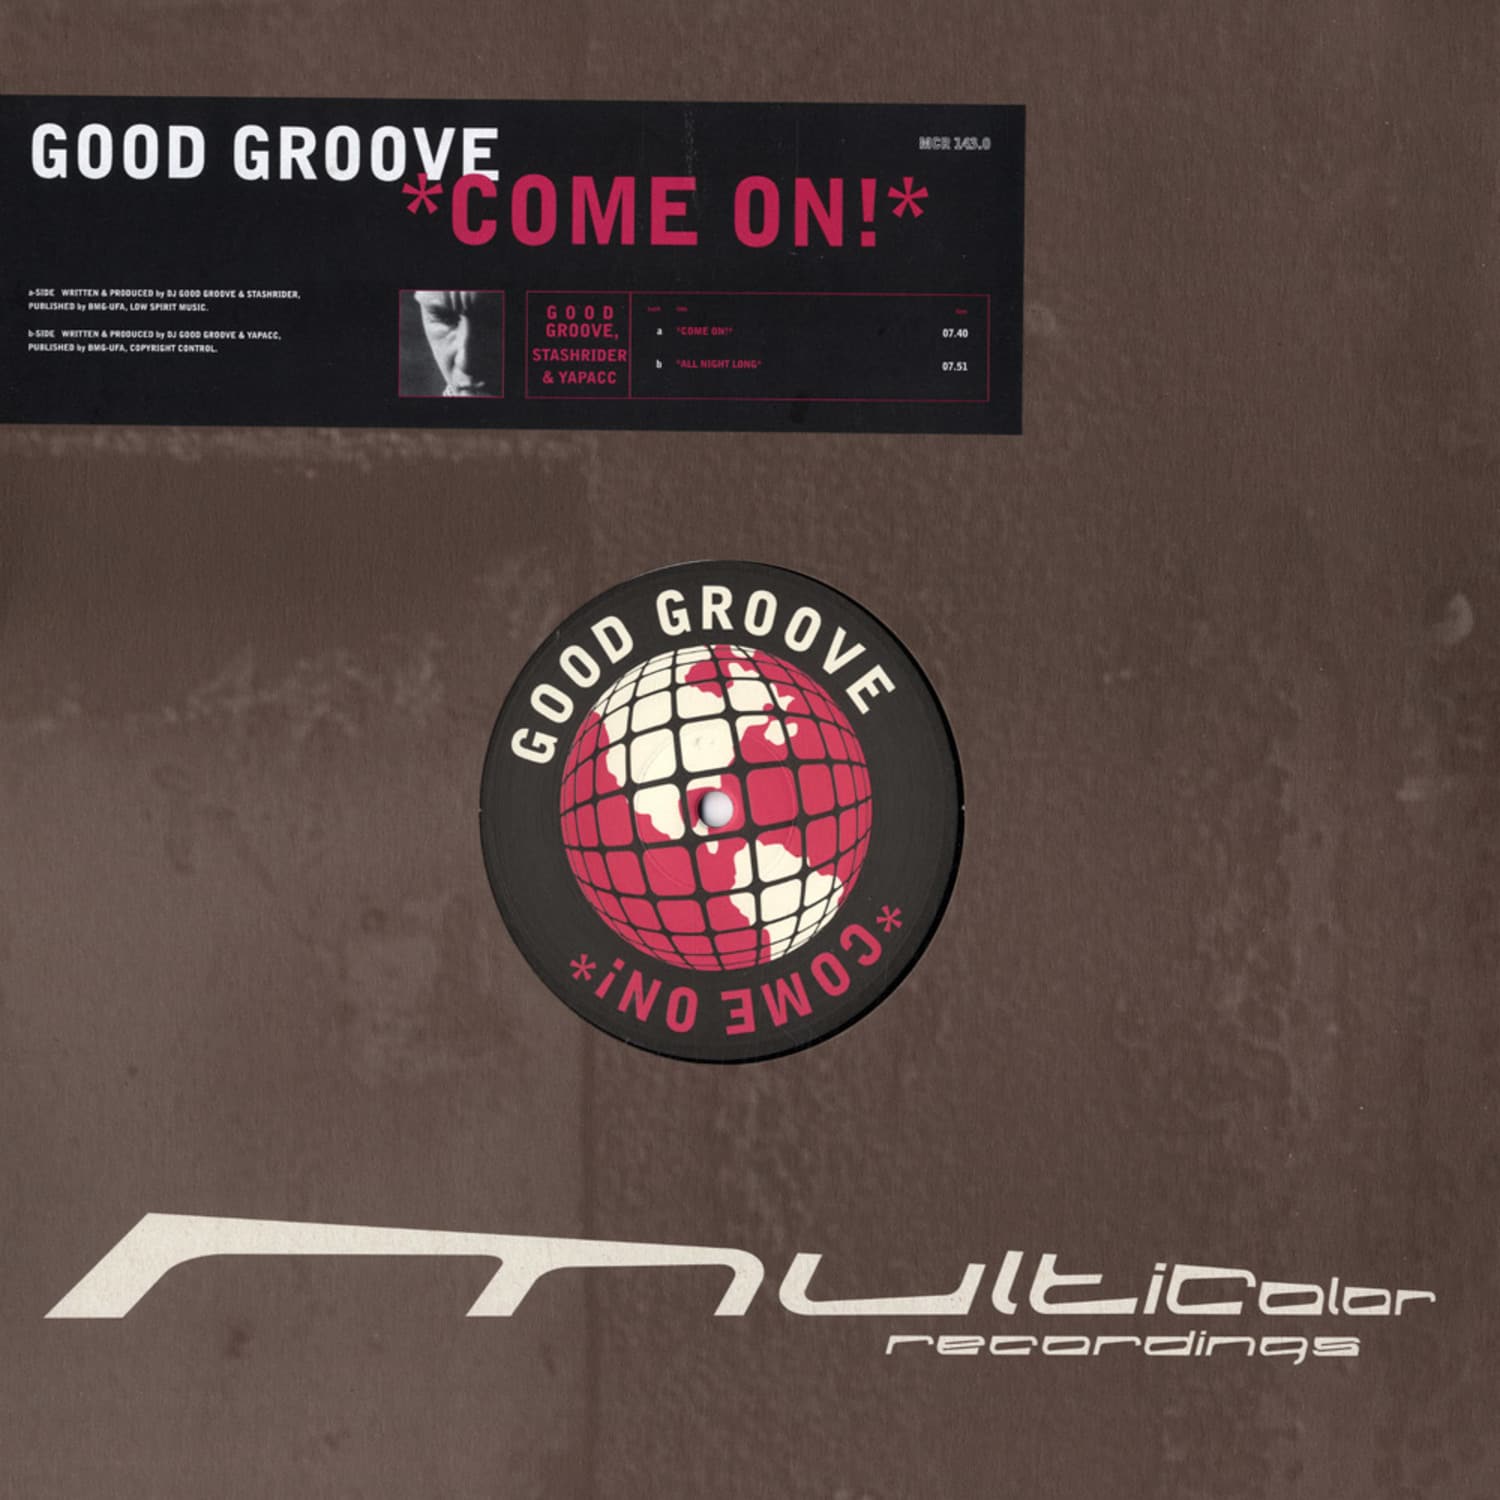 Good Groove - COME ON!